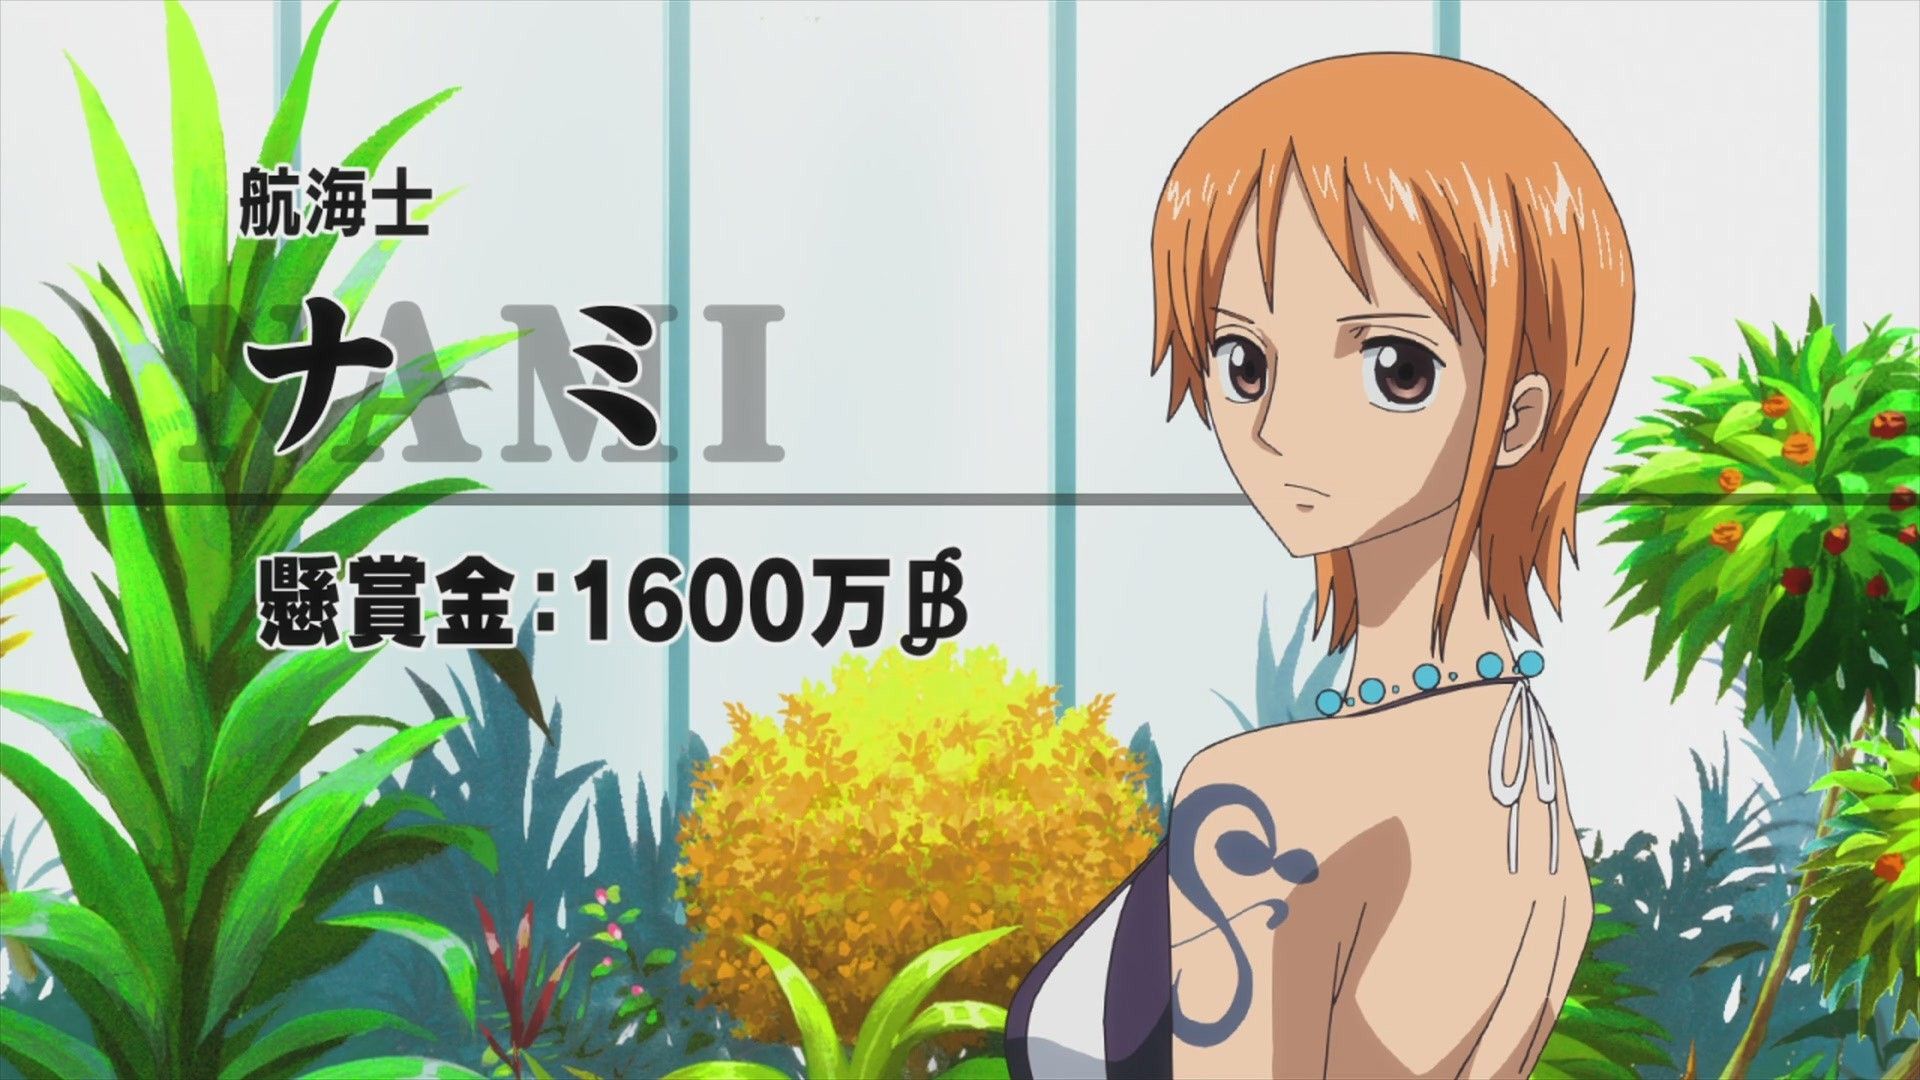 Wallpapers One Piece 2015 Nami And Law 1920x1080